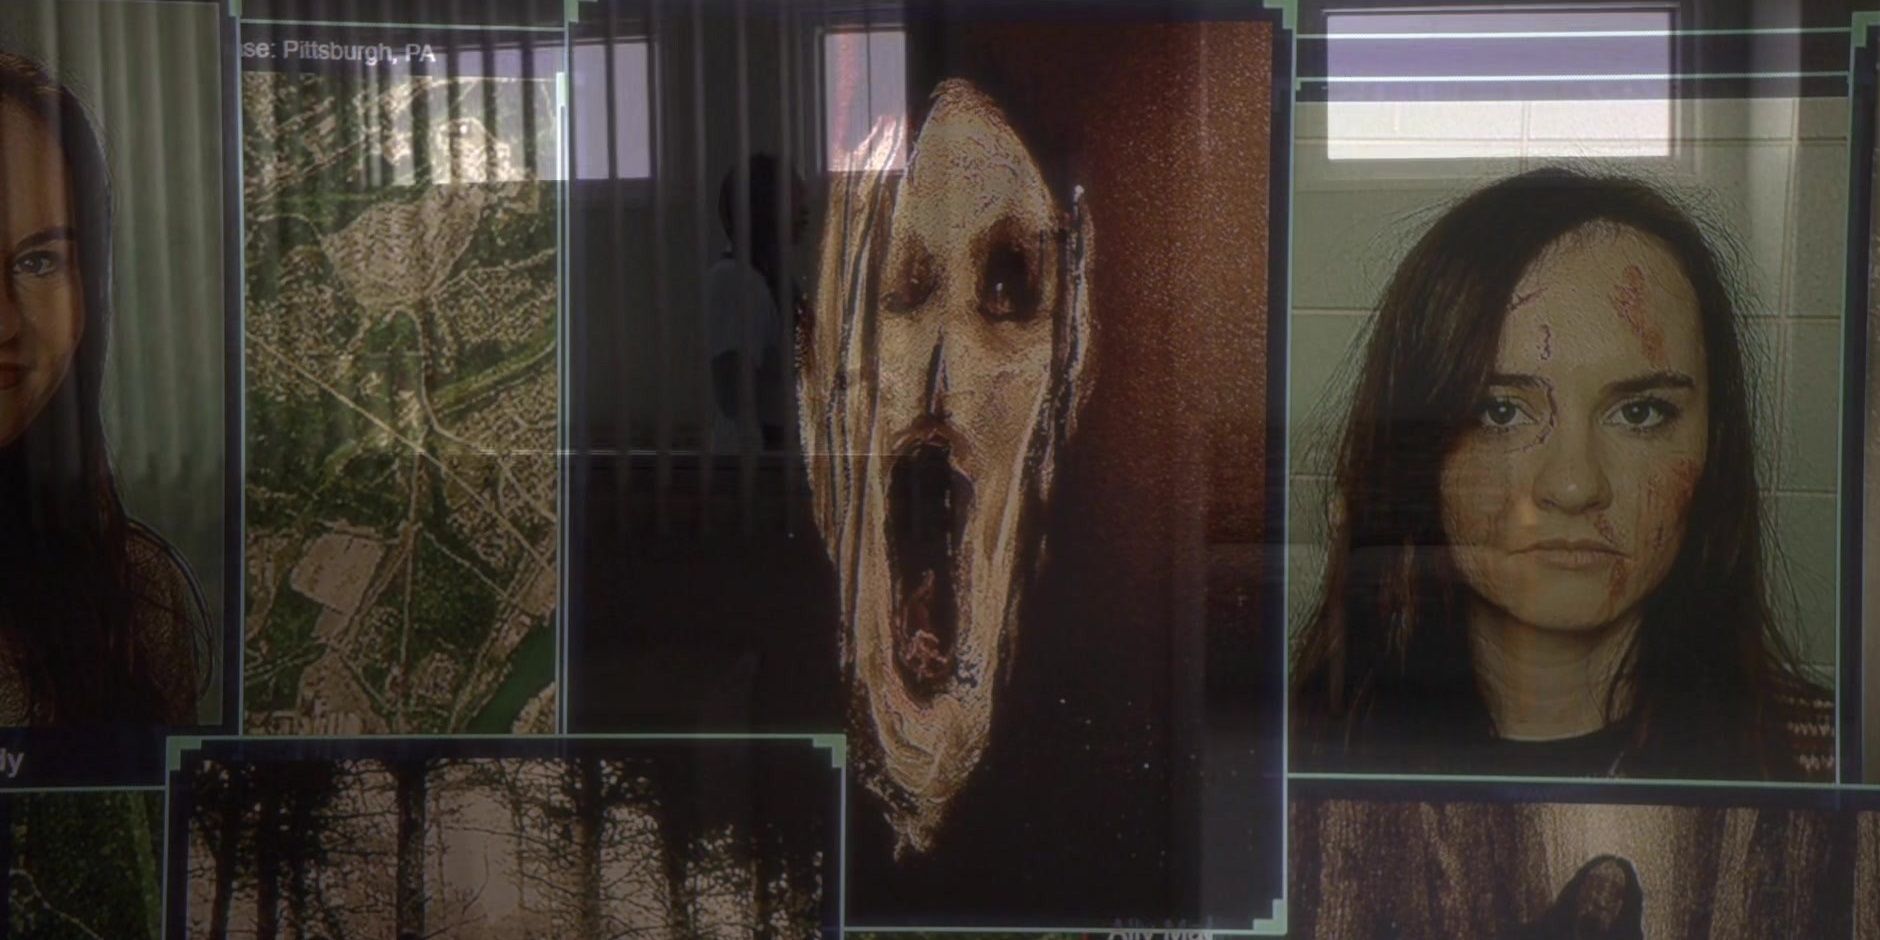 Scene depicting the legend of the Tall Man and a victim photo on a wall in Criminal Minds